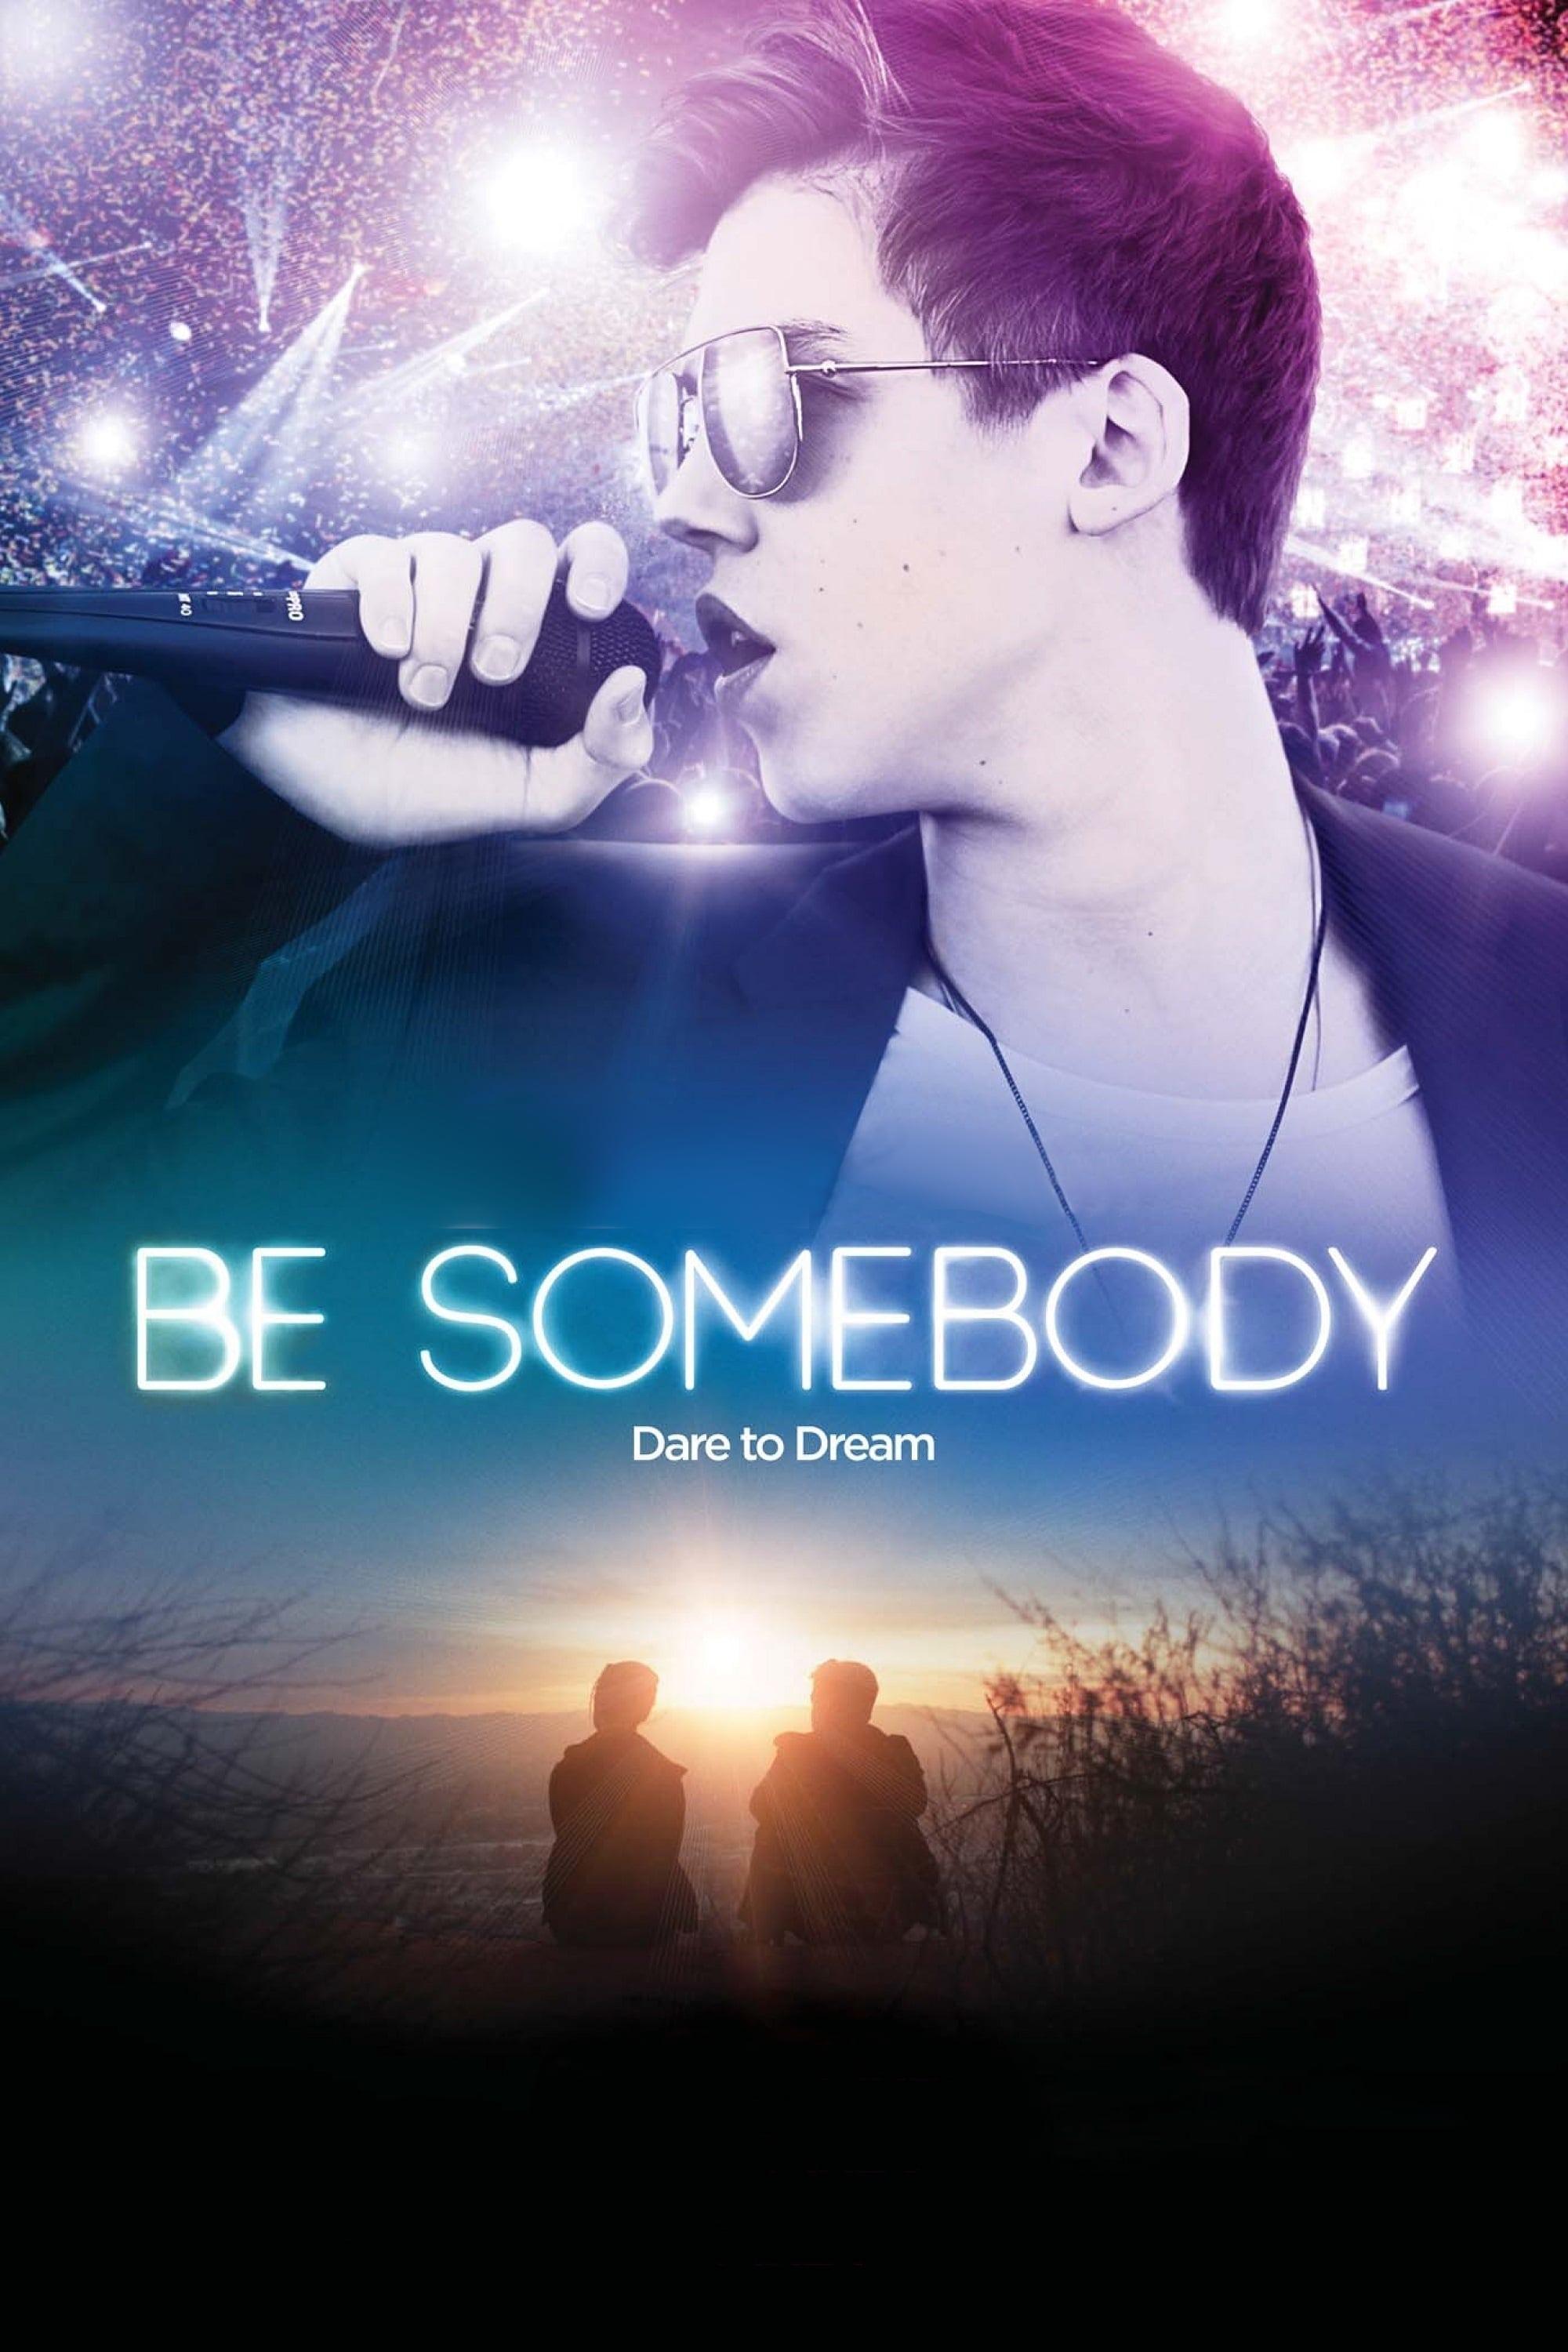 Be Somebody poster